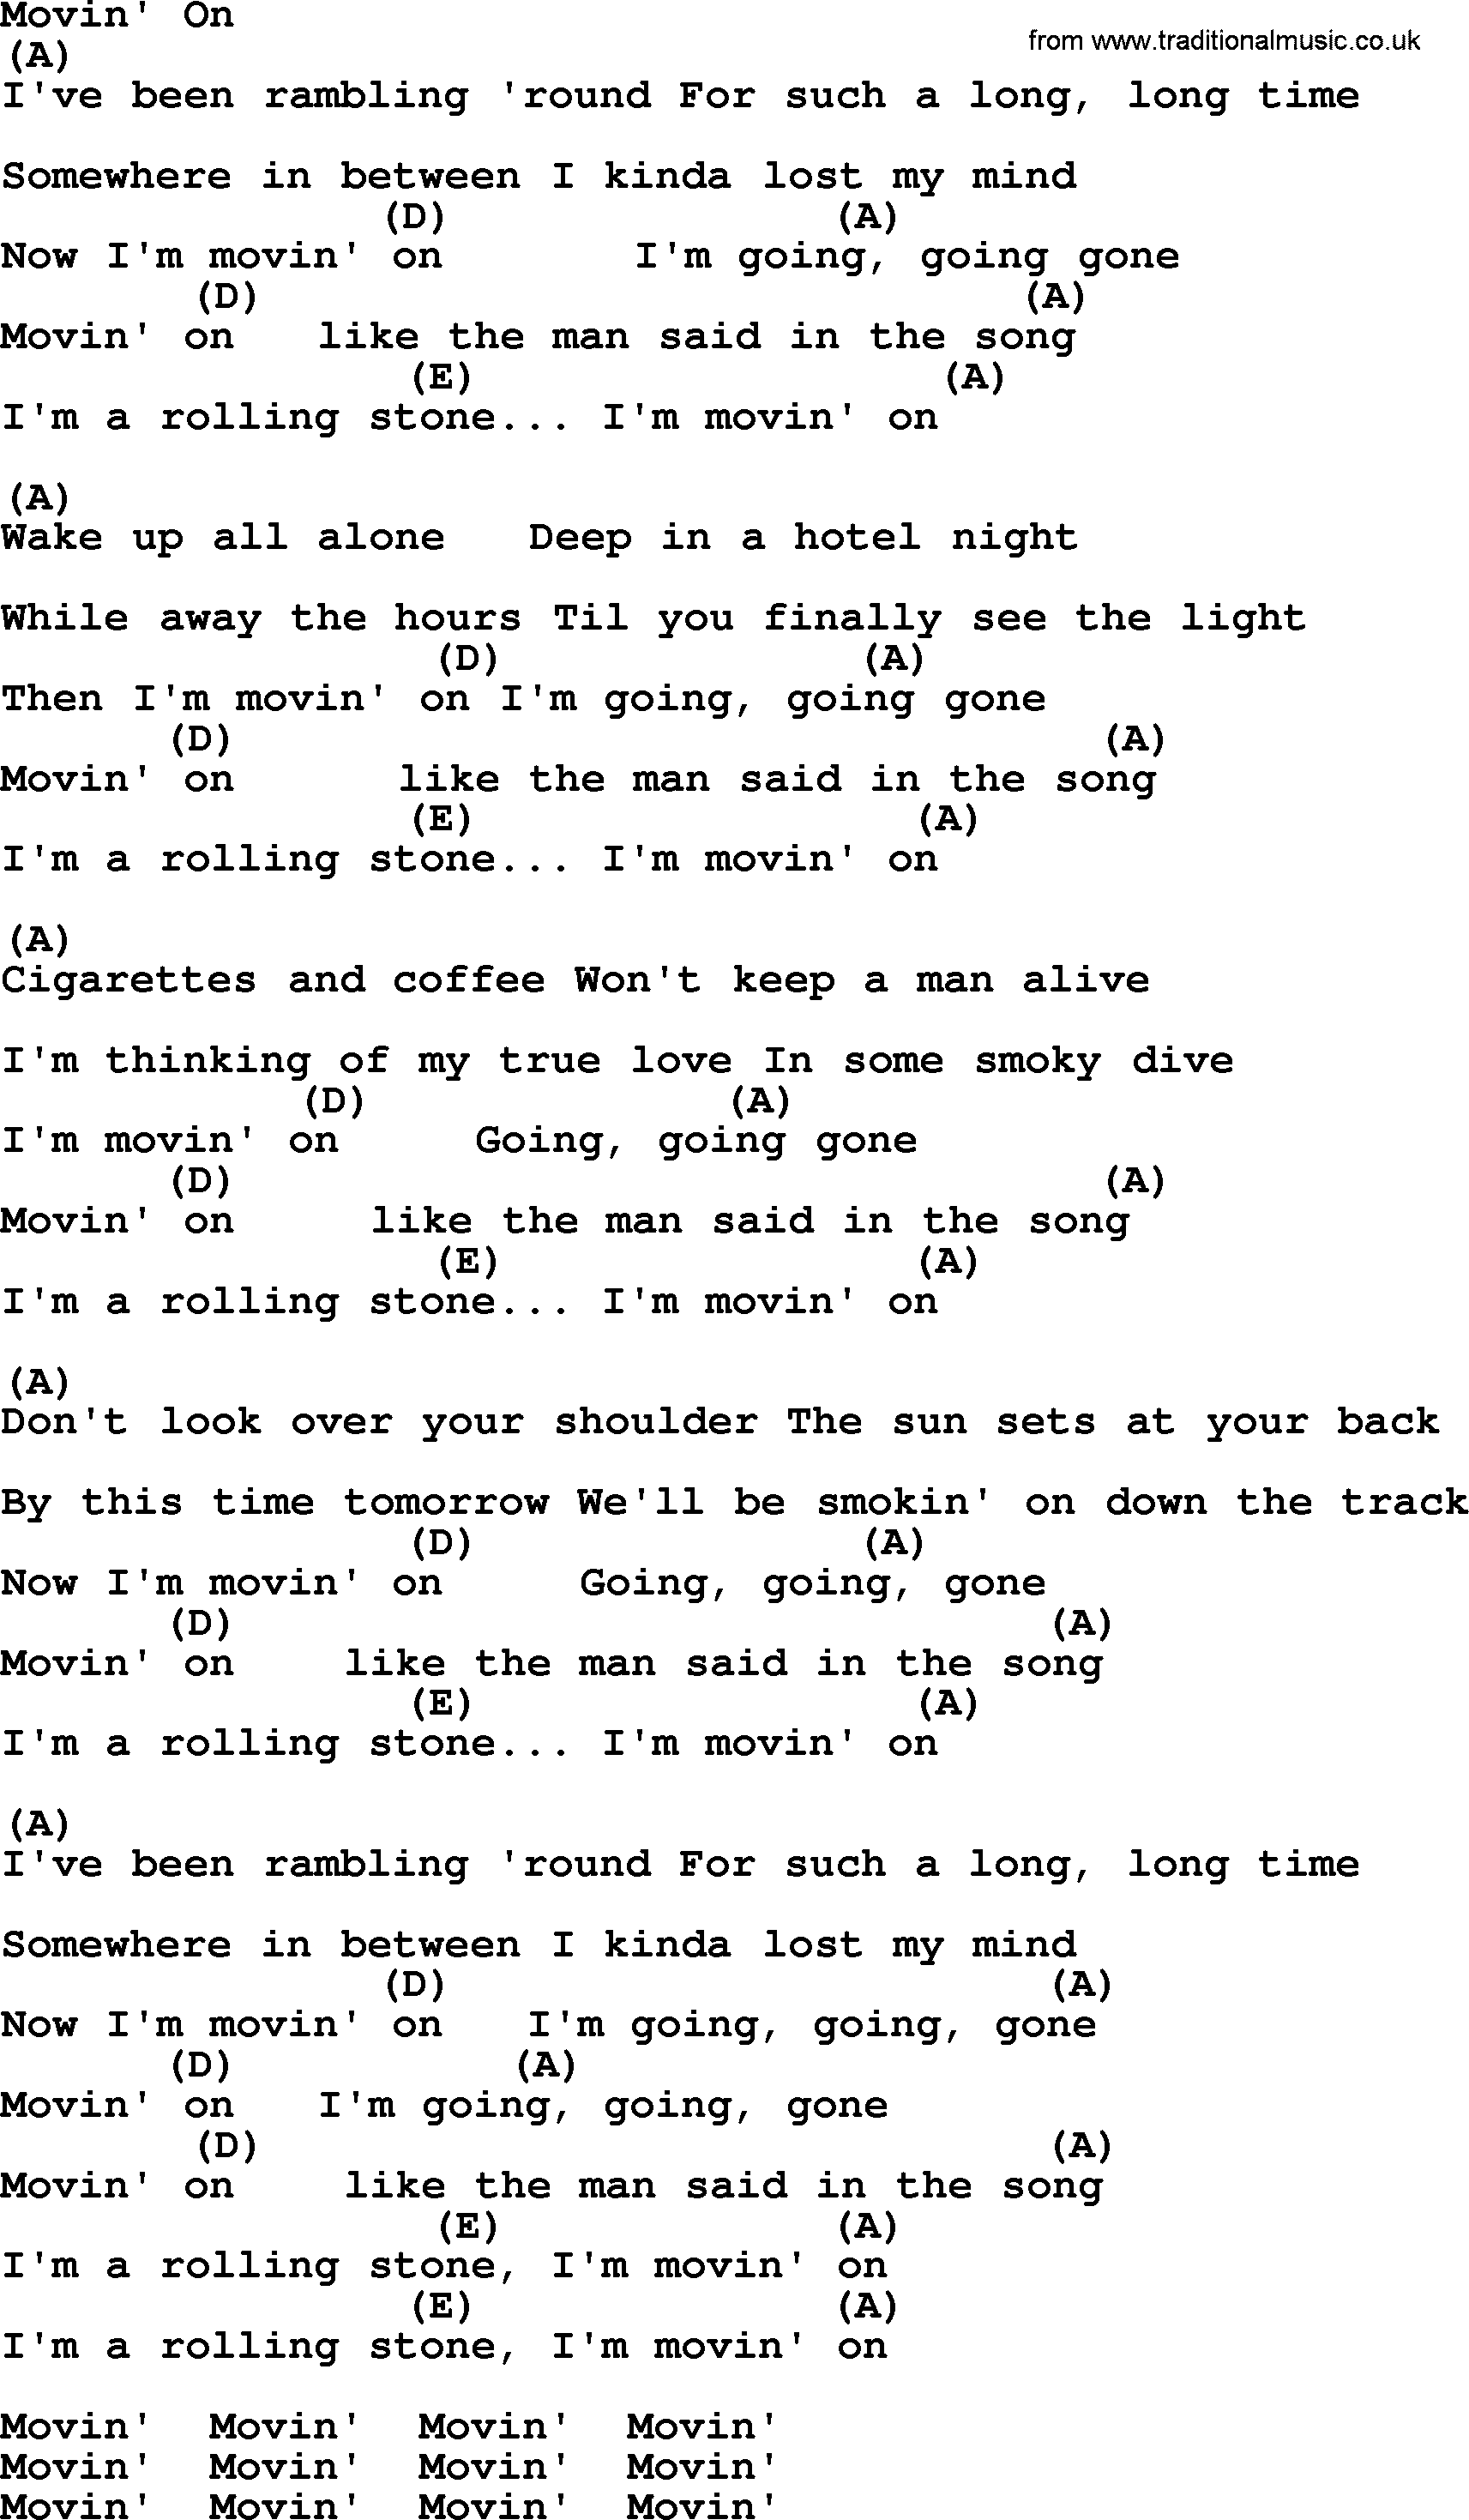 Bluegrass song: Movin' On, lyrics and chords